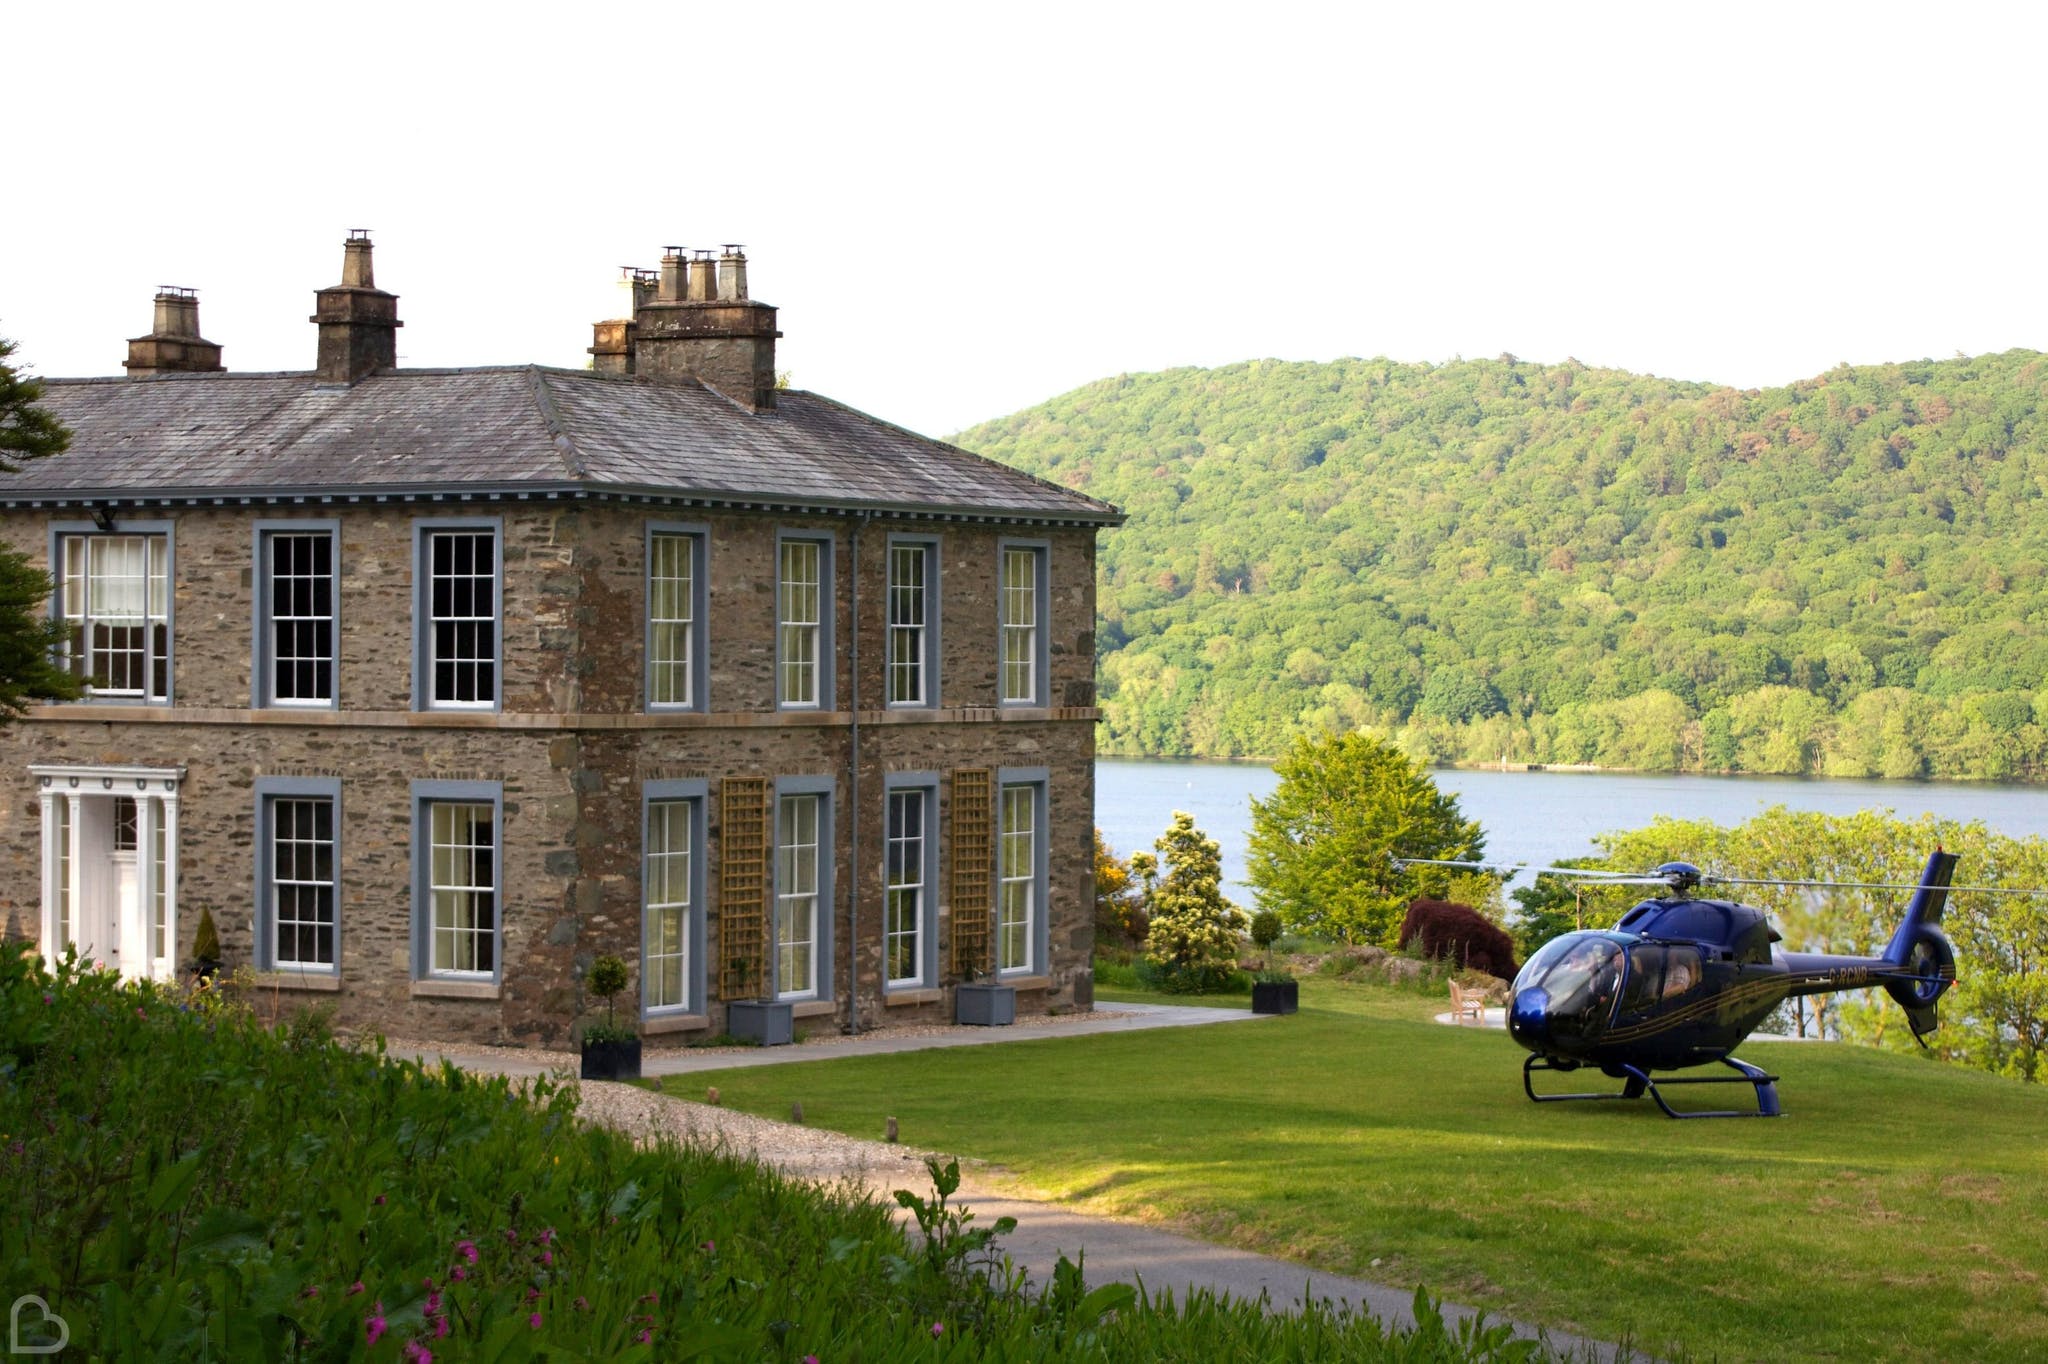 a helicopter is parked outside silverholme manor, a country house wedding venue in the uk